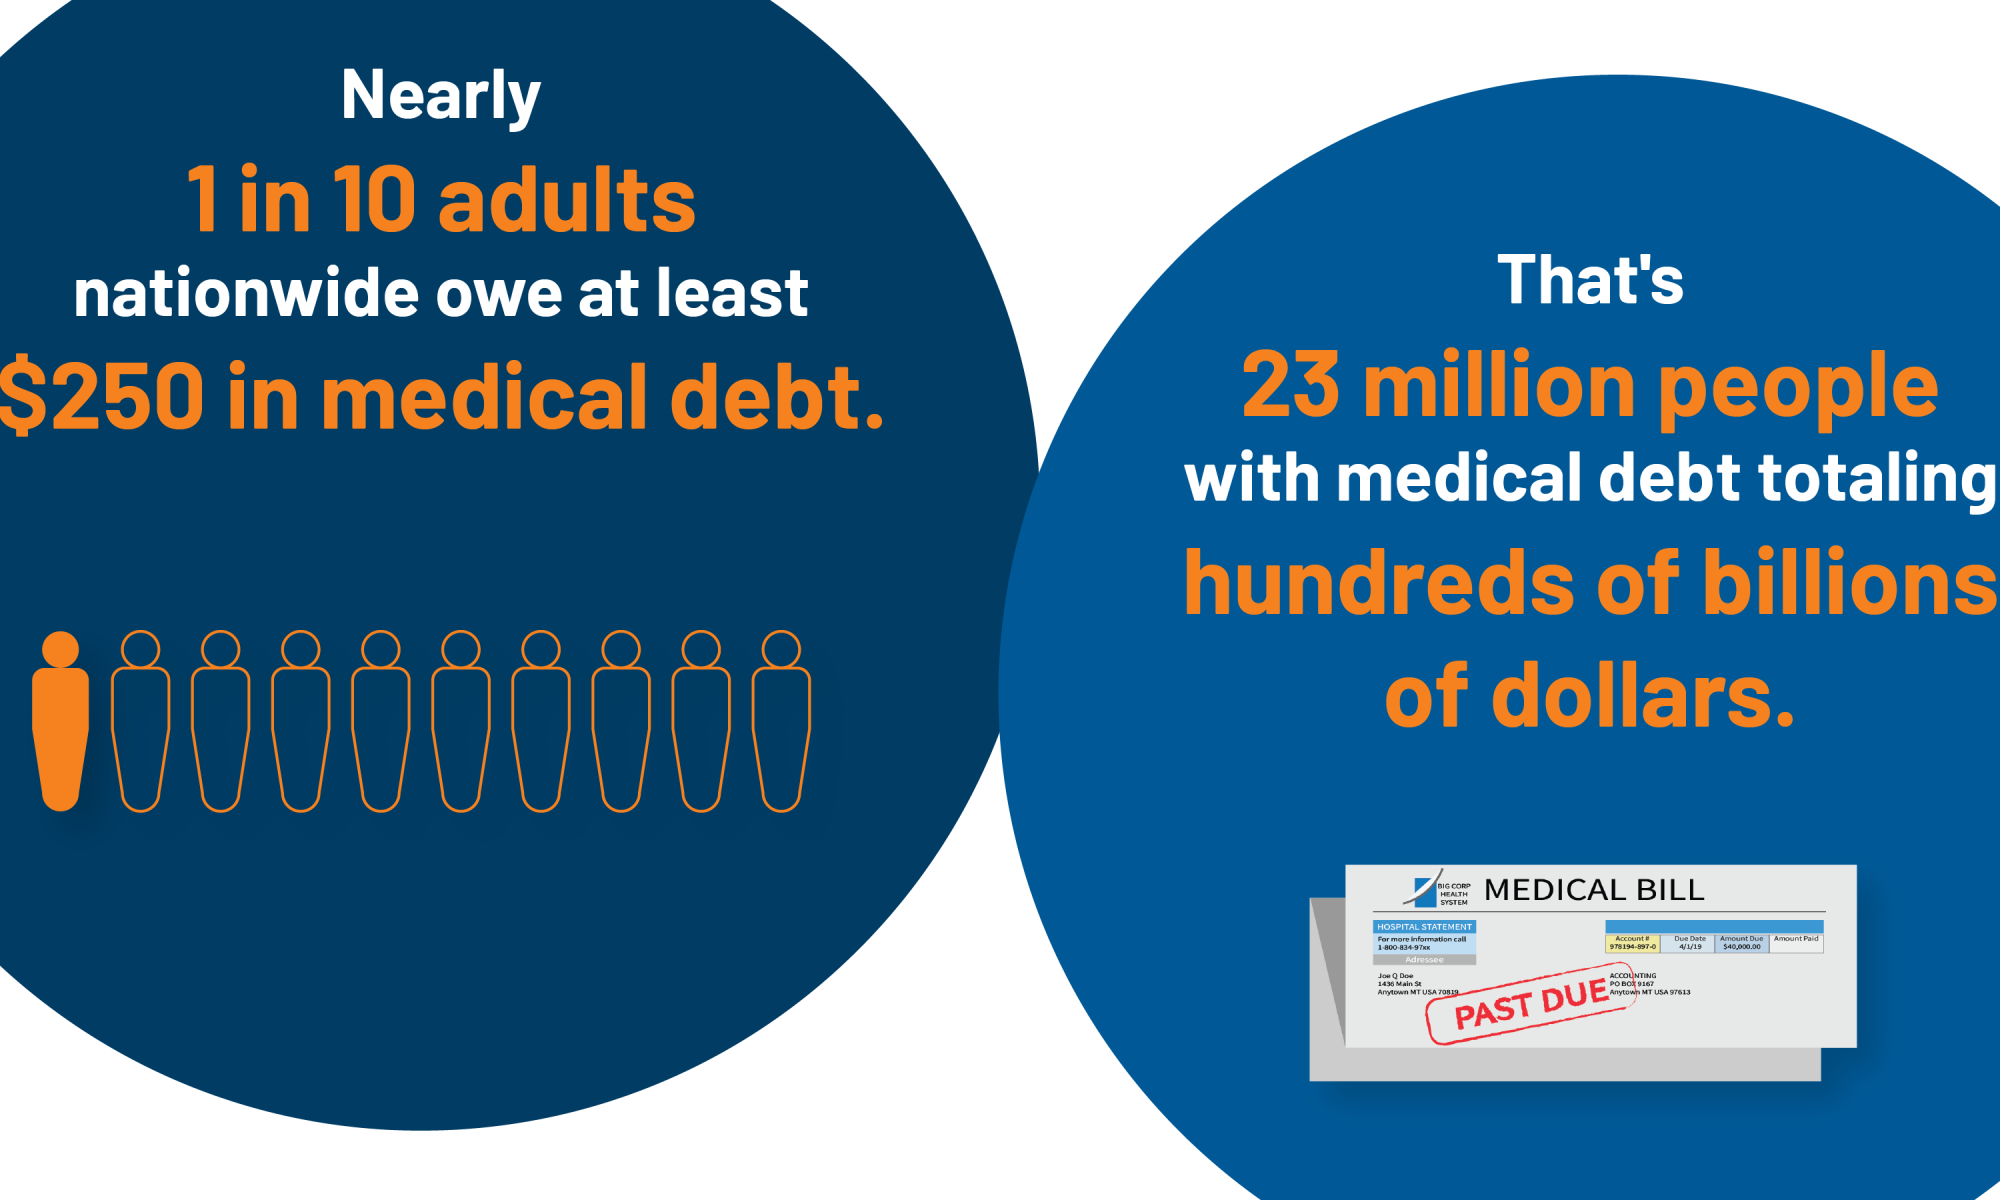 Medical debt in the US